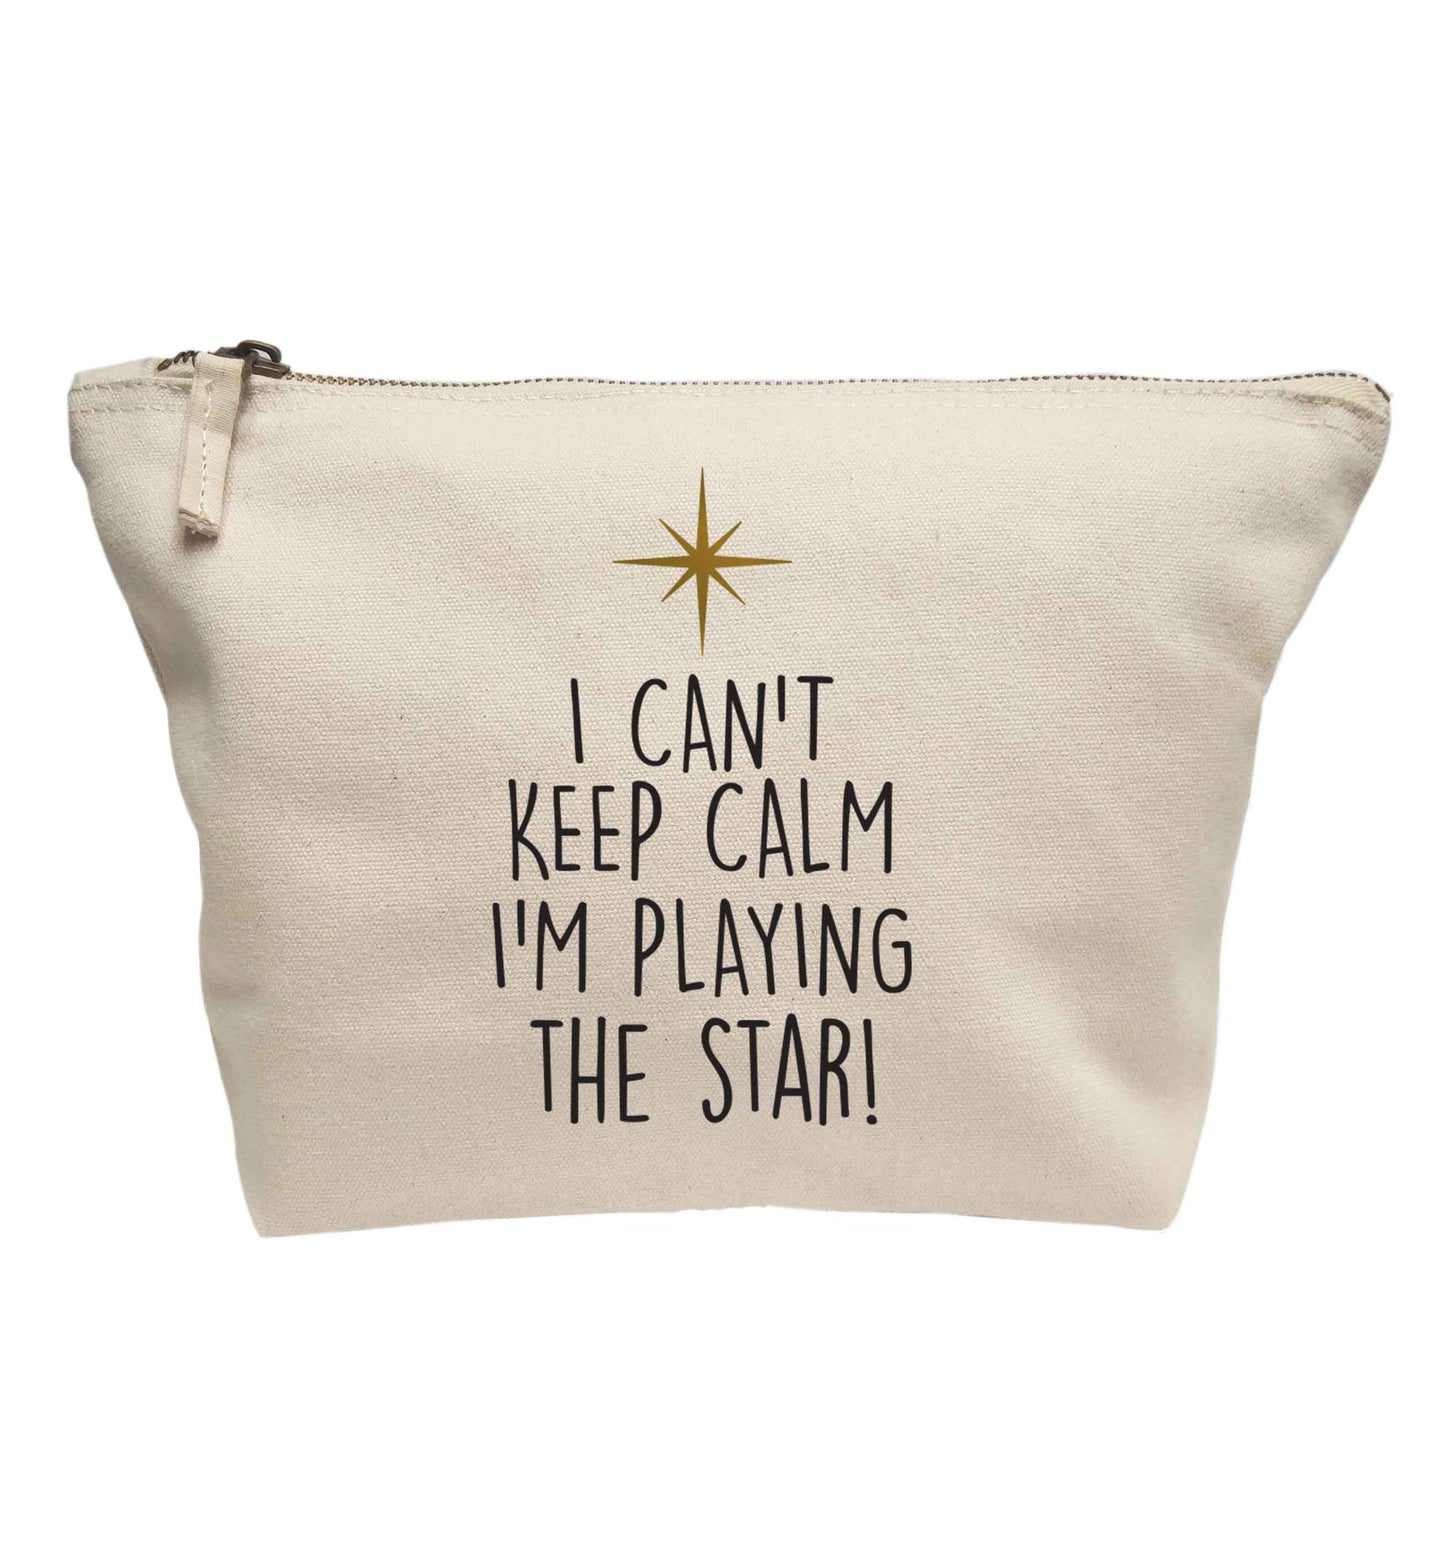 I can't keep calm I'm playing the star! | makeup / wash bag